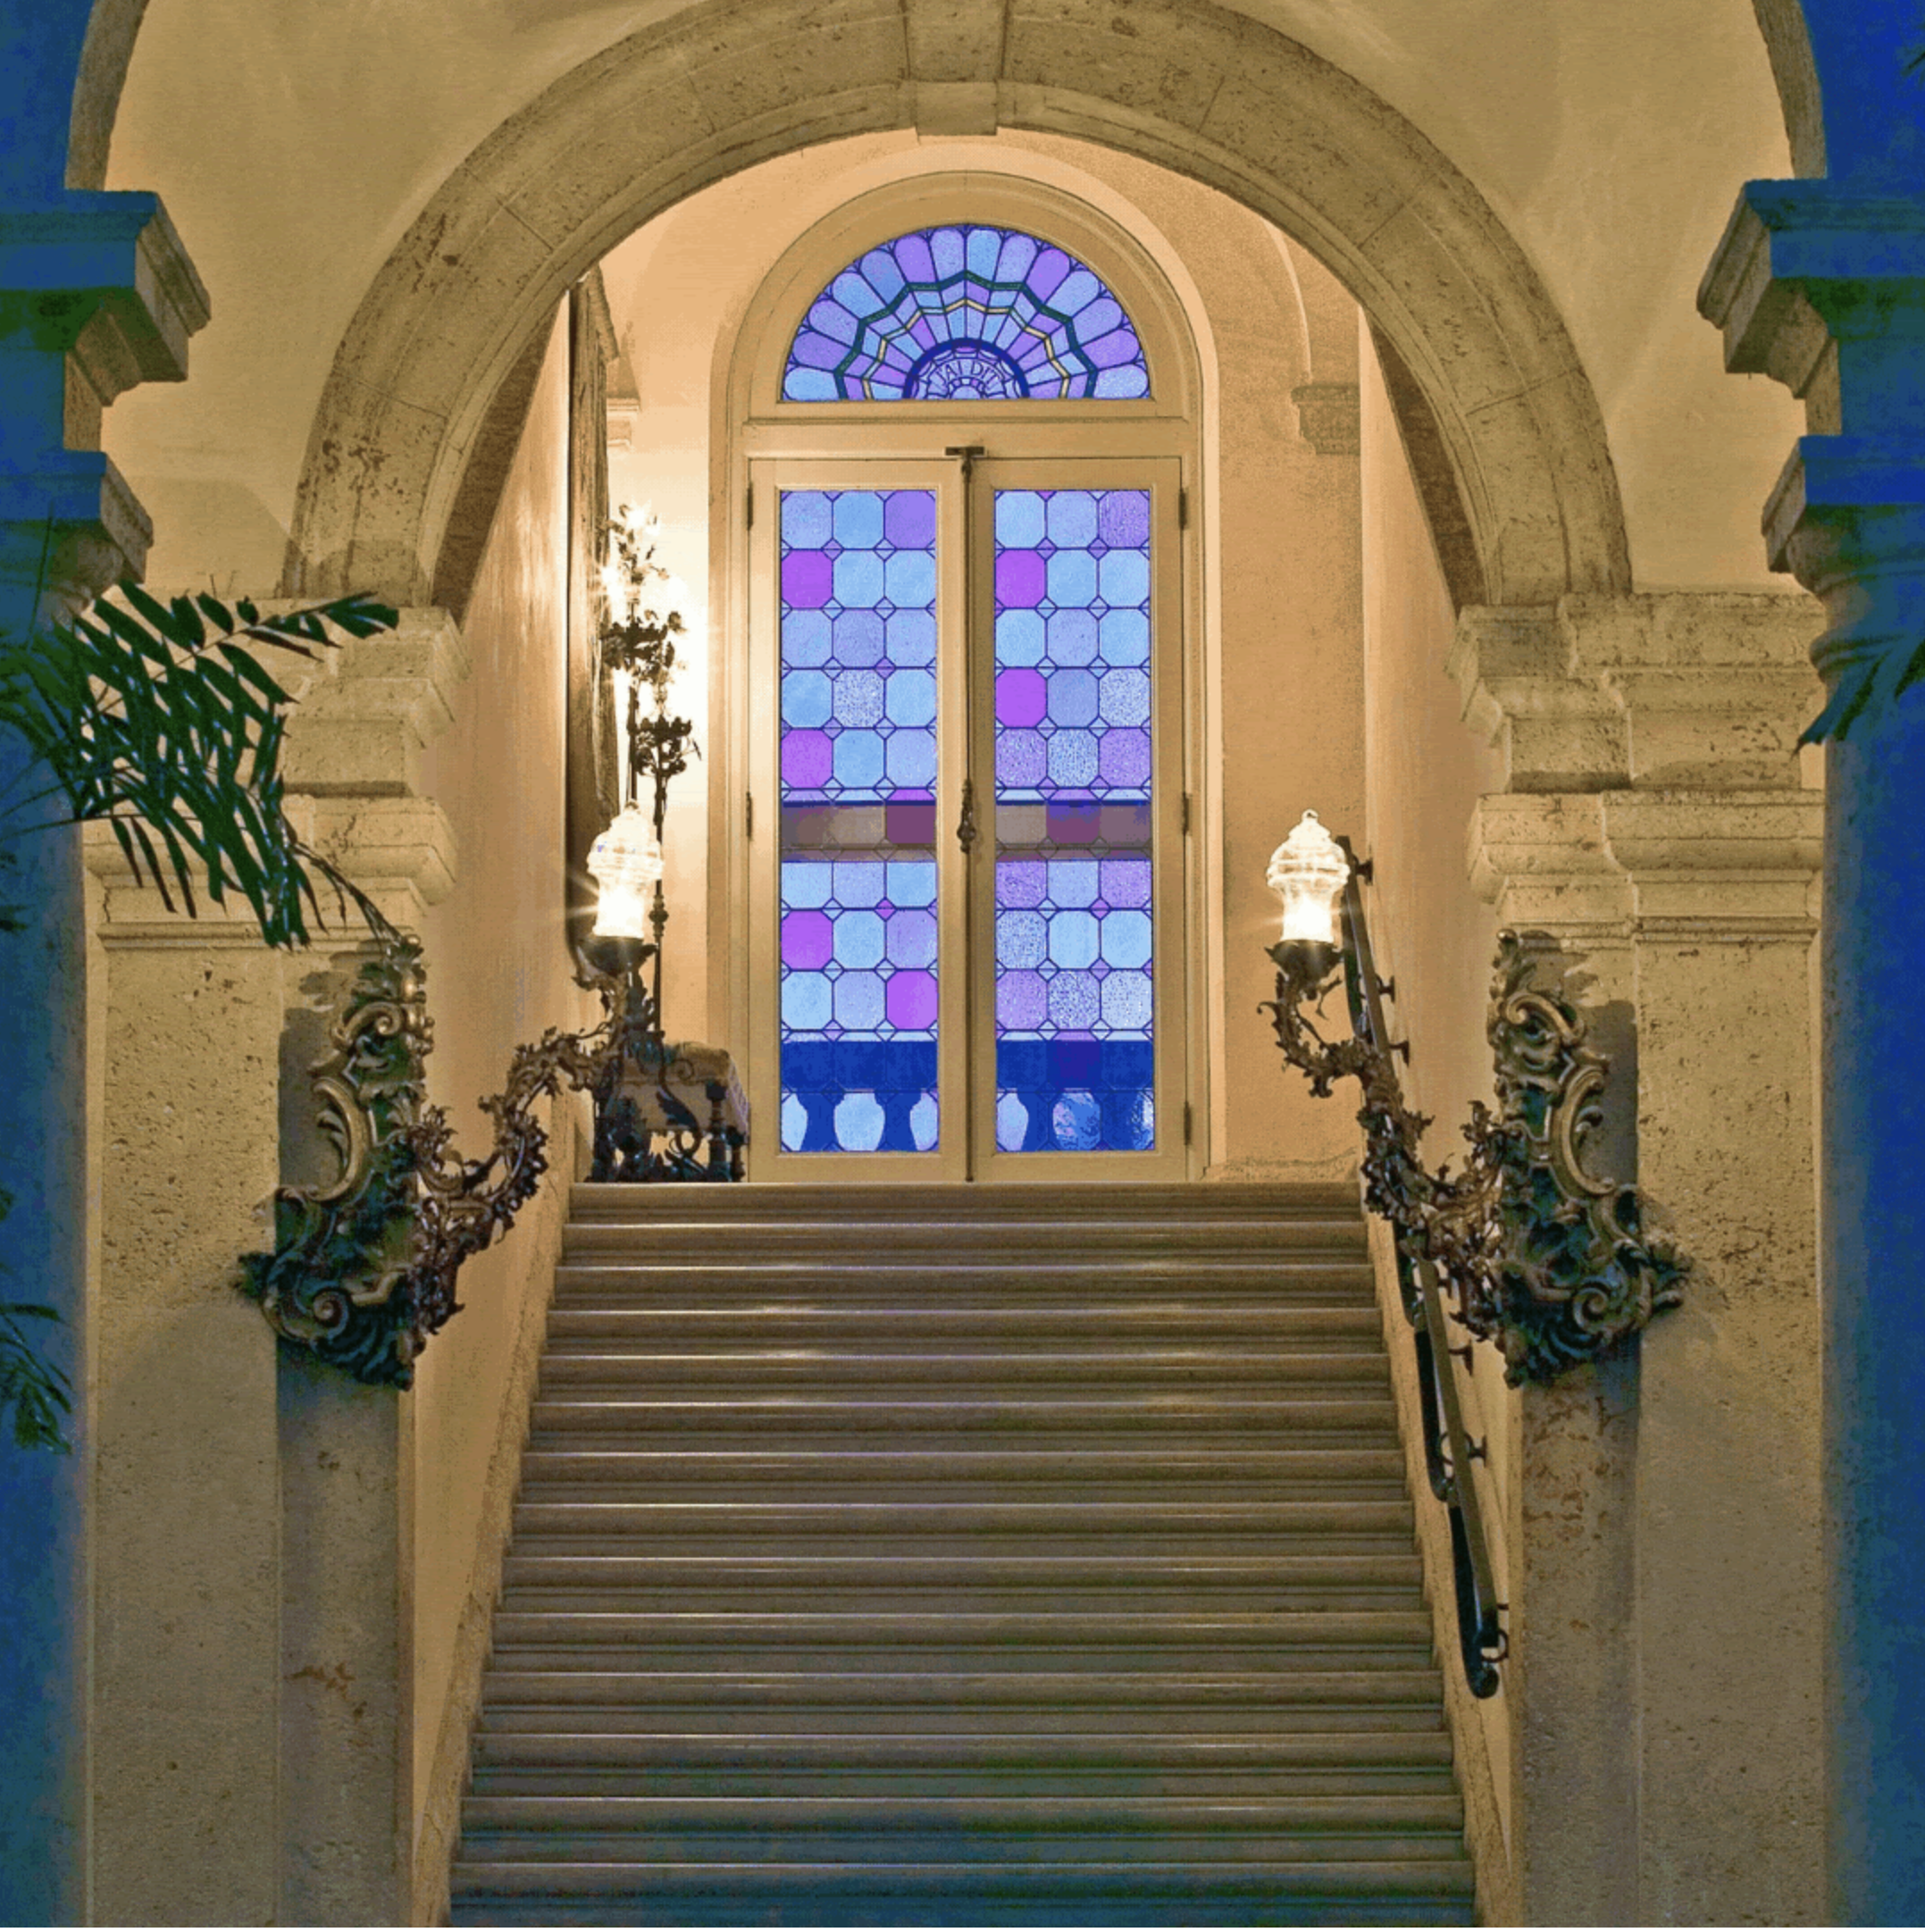 A limestone stairway ascends to a landing with a multi-colored stained glass window, ornate lanterns frame either side